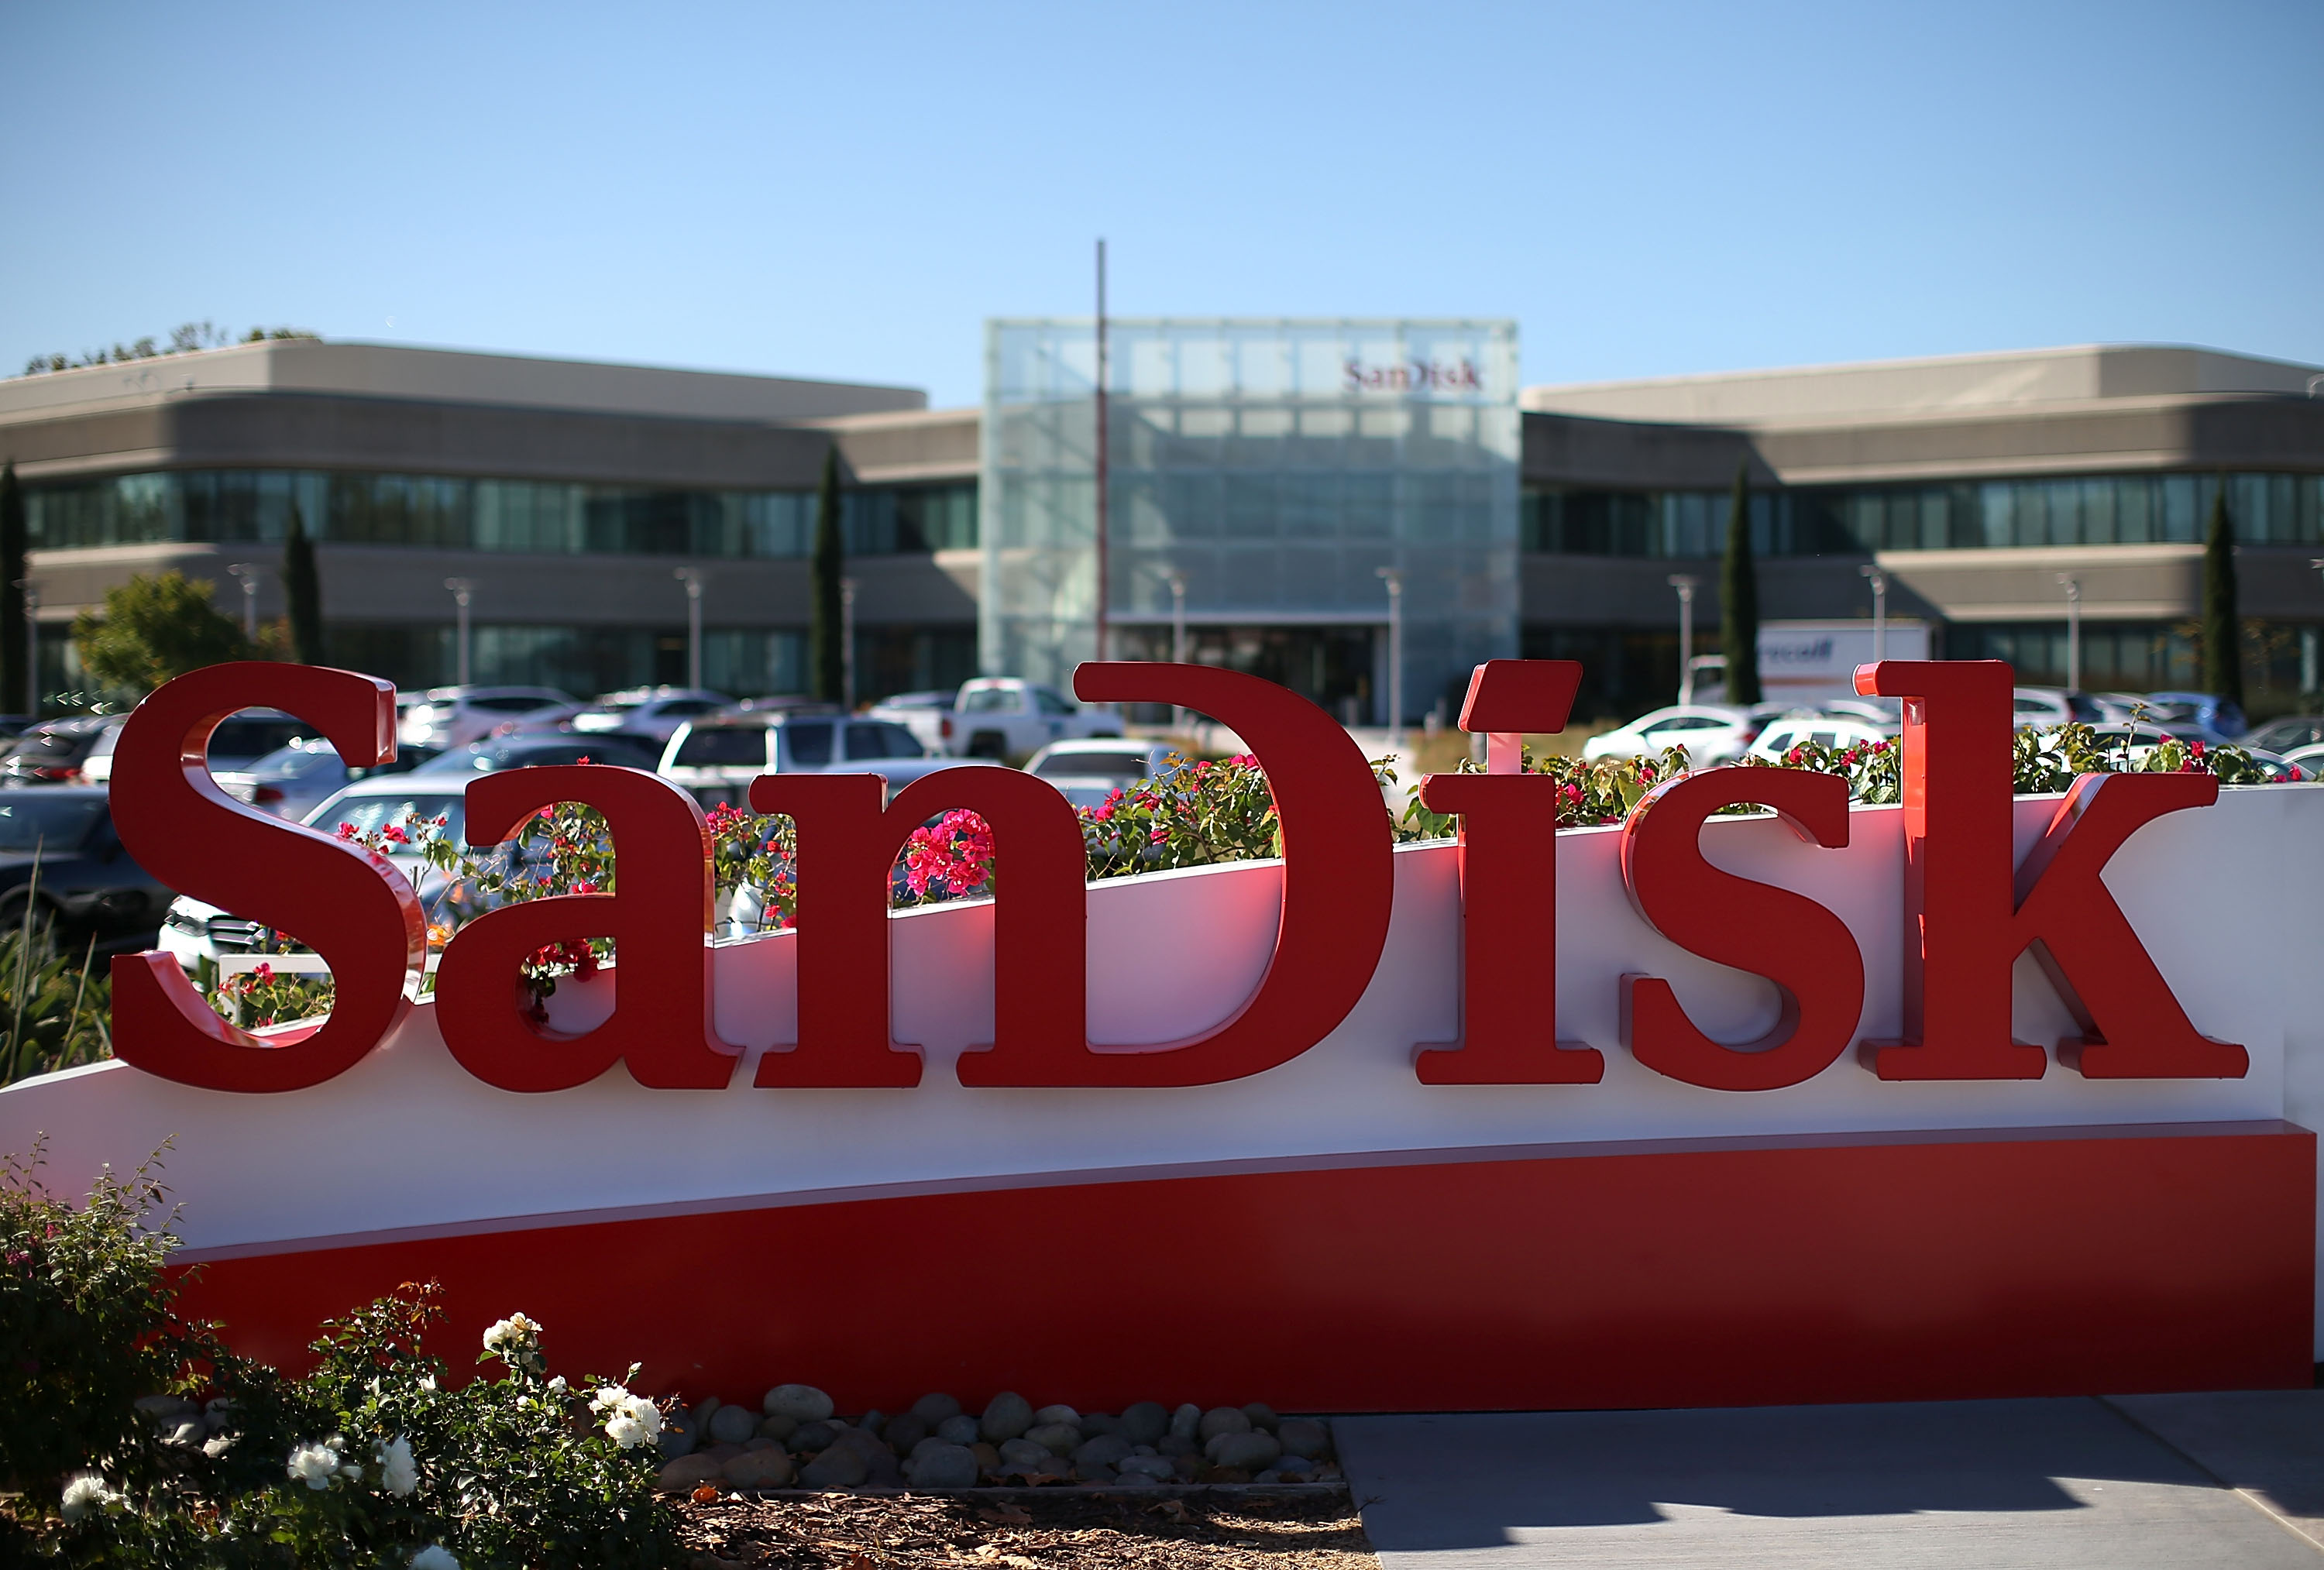 MILPITAS, CA - OCTOBER 21:  A sign is posted in front of the SanDisk headquarters on October 21, 2015 in Milpitas, California. Computer data storage company Western Digital announced plans to acquire flash memory storage maker SanDisk for $19 billion.  (Photo by Justin Sullivan/Getty Images)